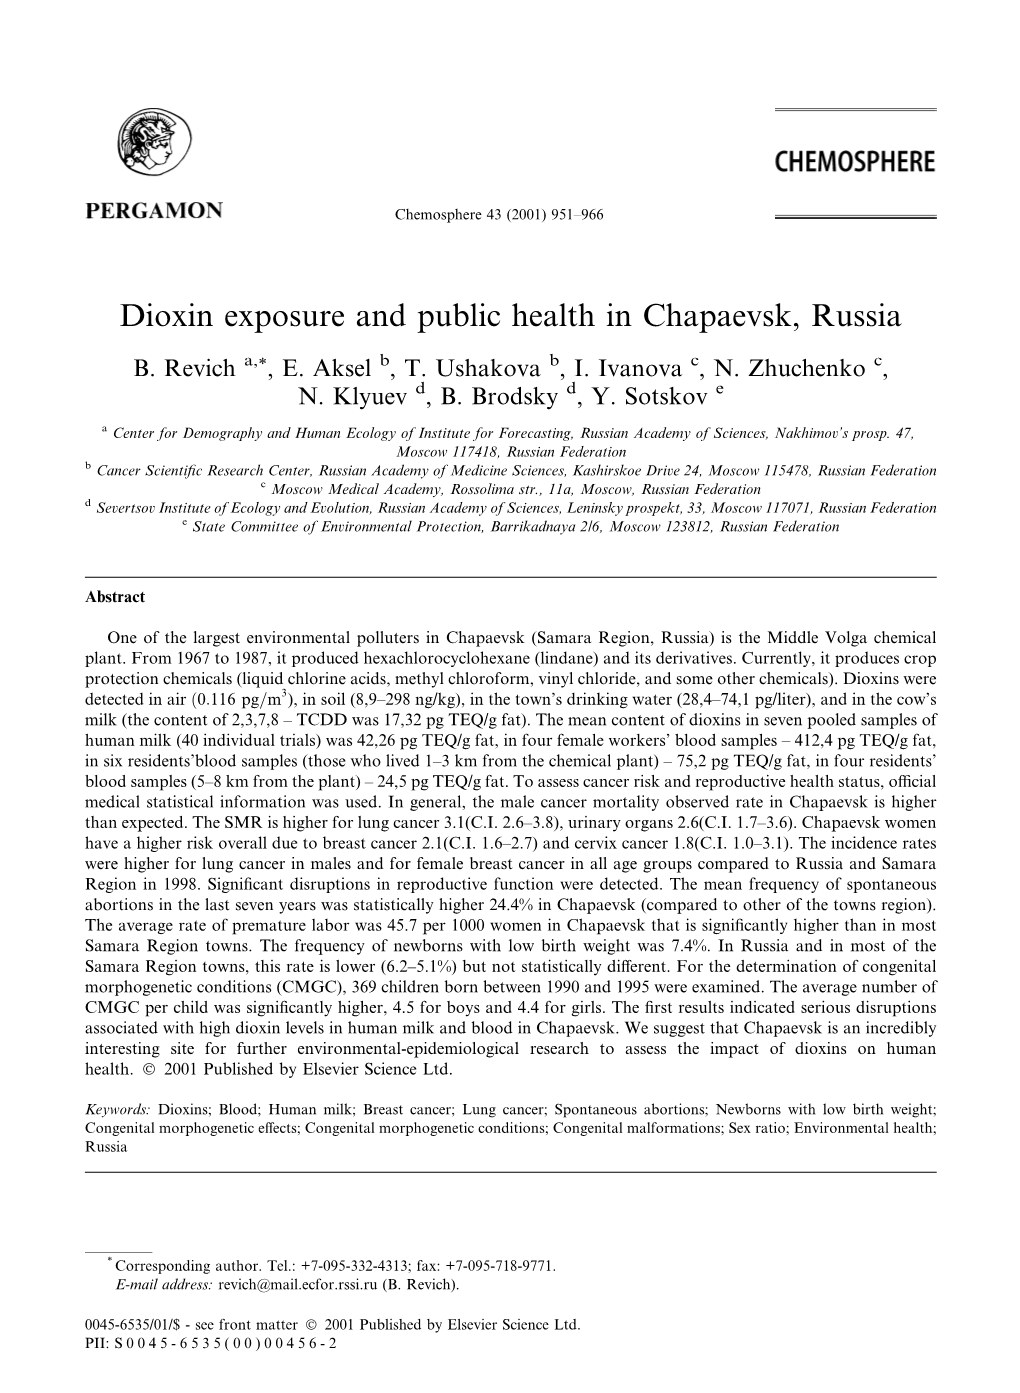 Dioxin Exposure and Public Health in Chapaevsk, Russia